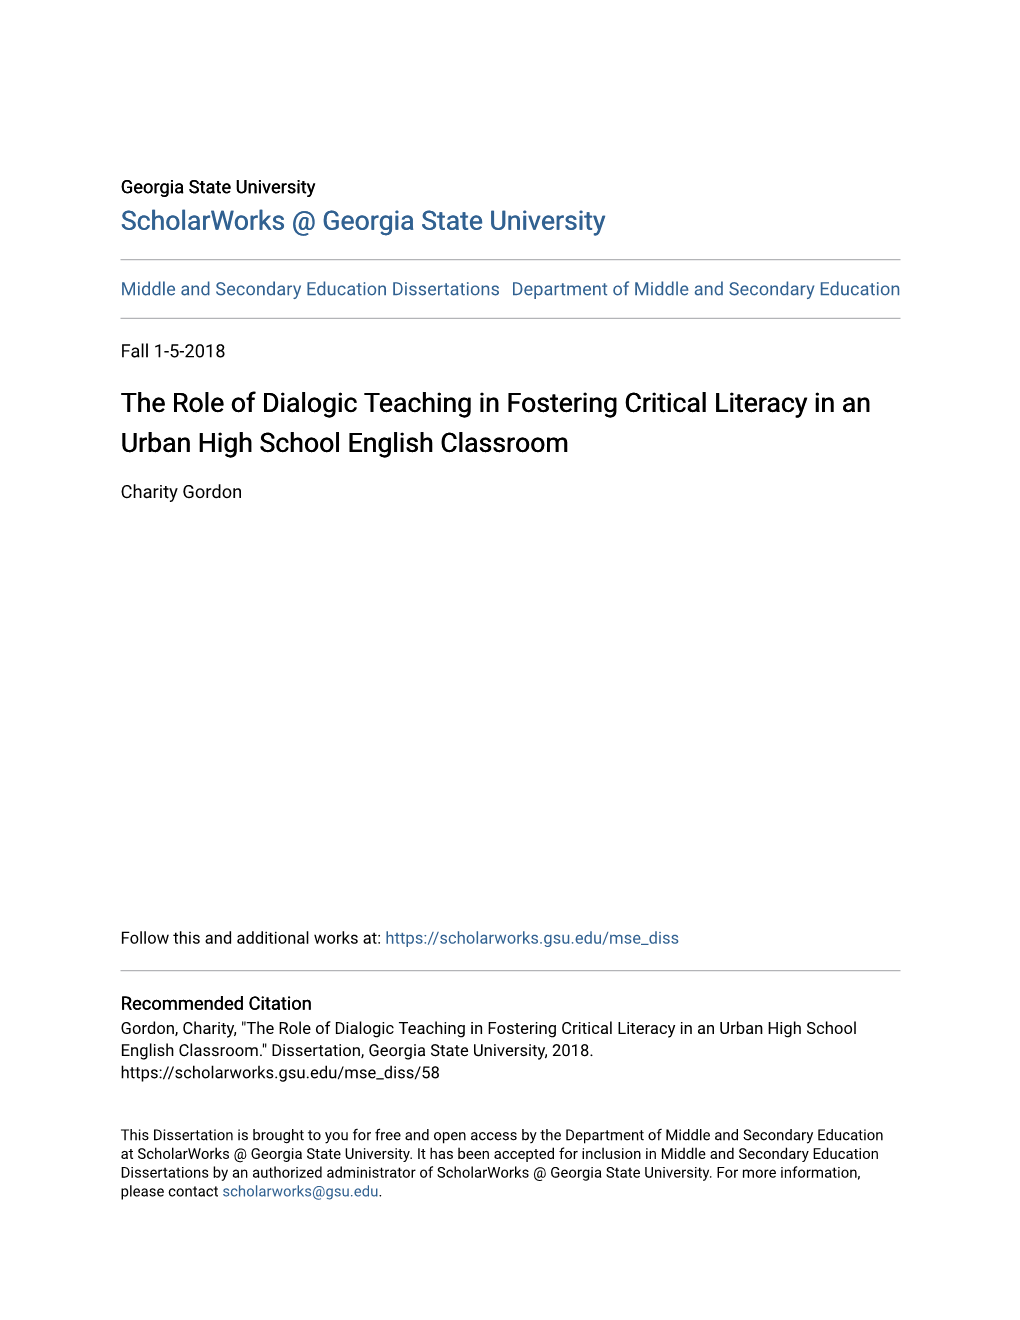 The Role of Dialogic Teaching in Fostering Critical Literacy in an Urban High School English Classroom